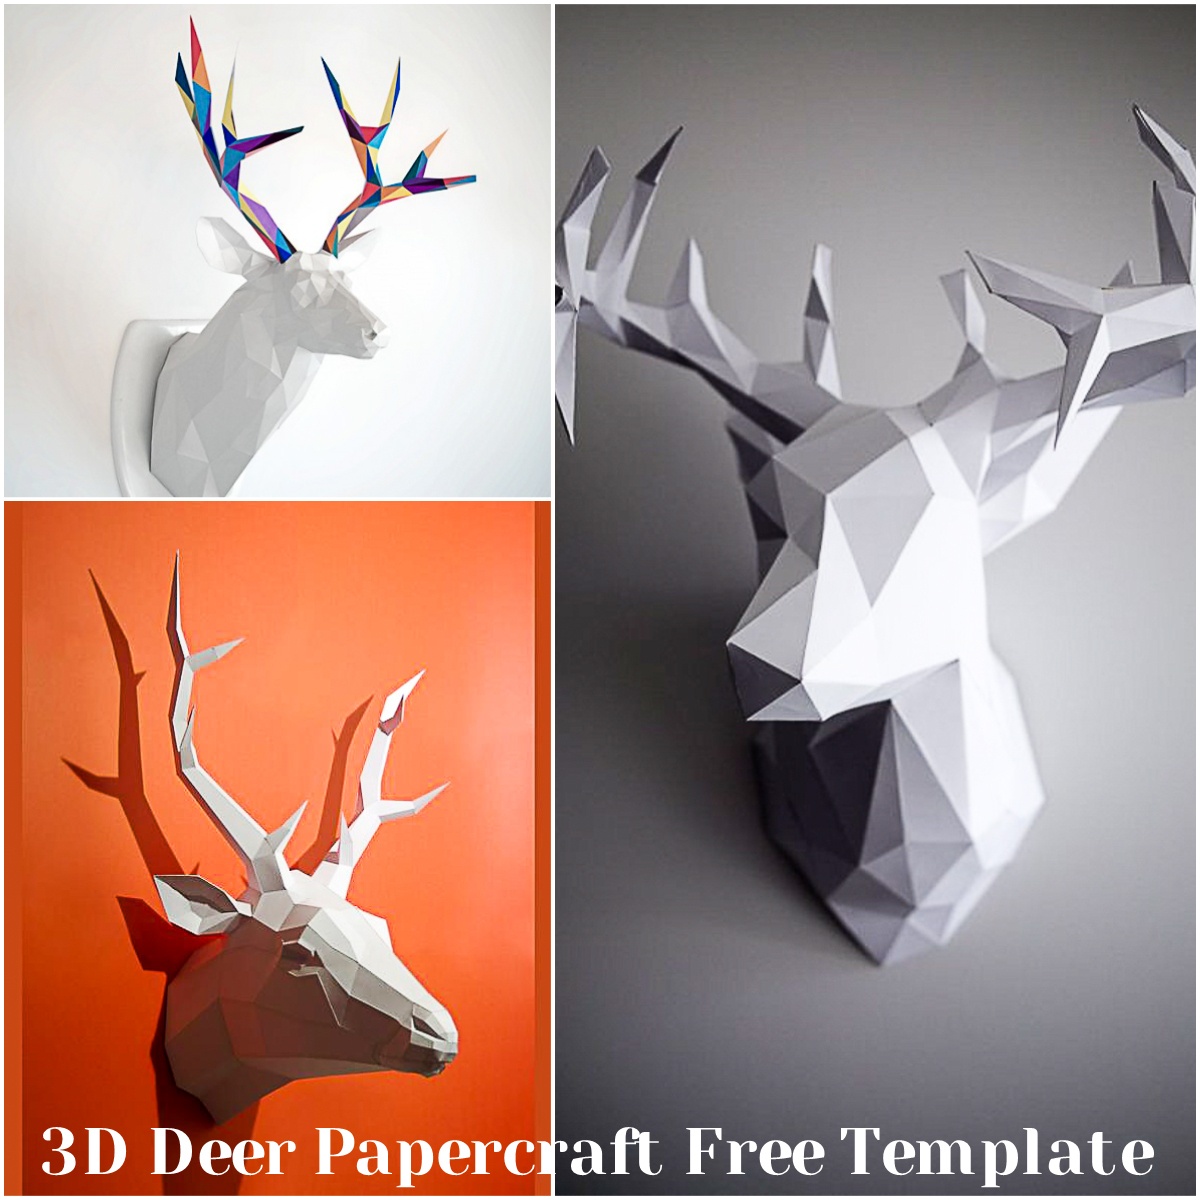 Printables And Paper Crafts | Free Download | Cgispread - Free Printable Paper Crafts